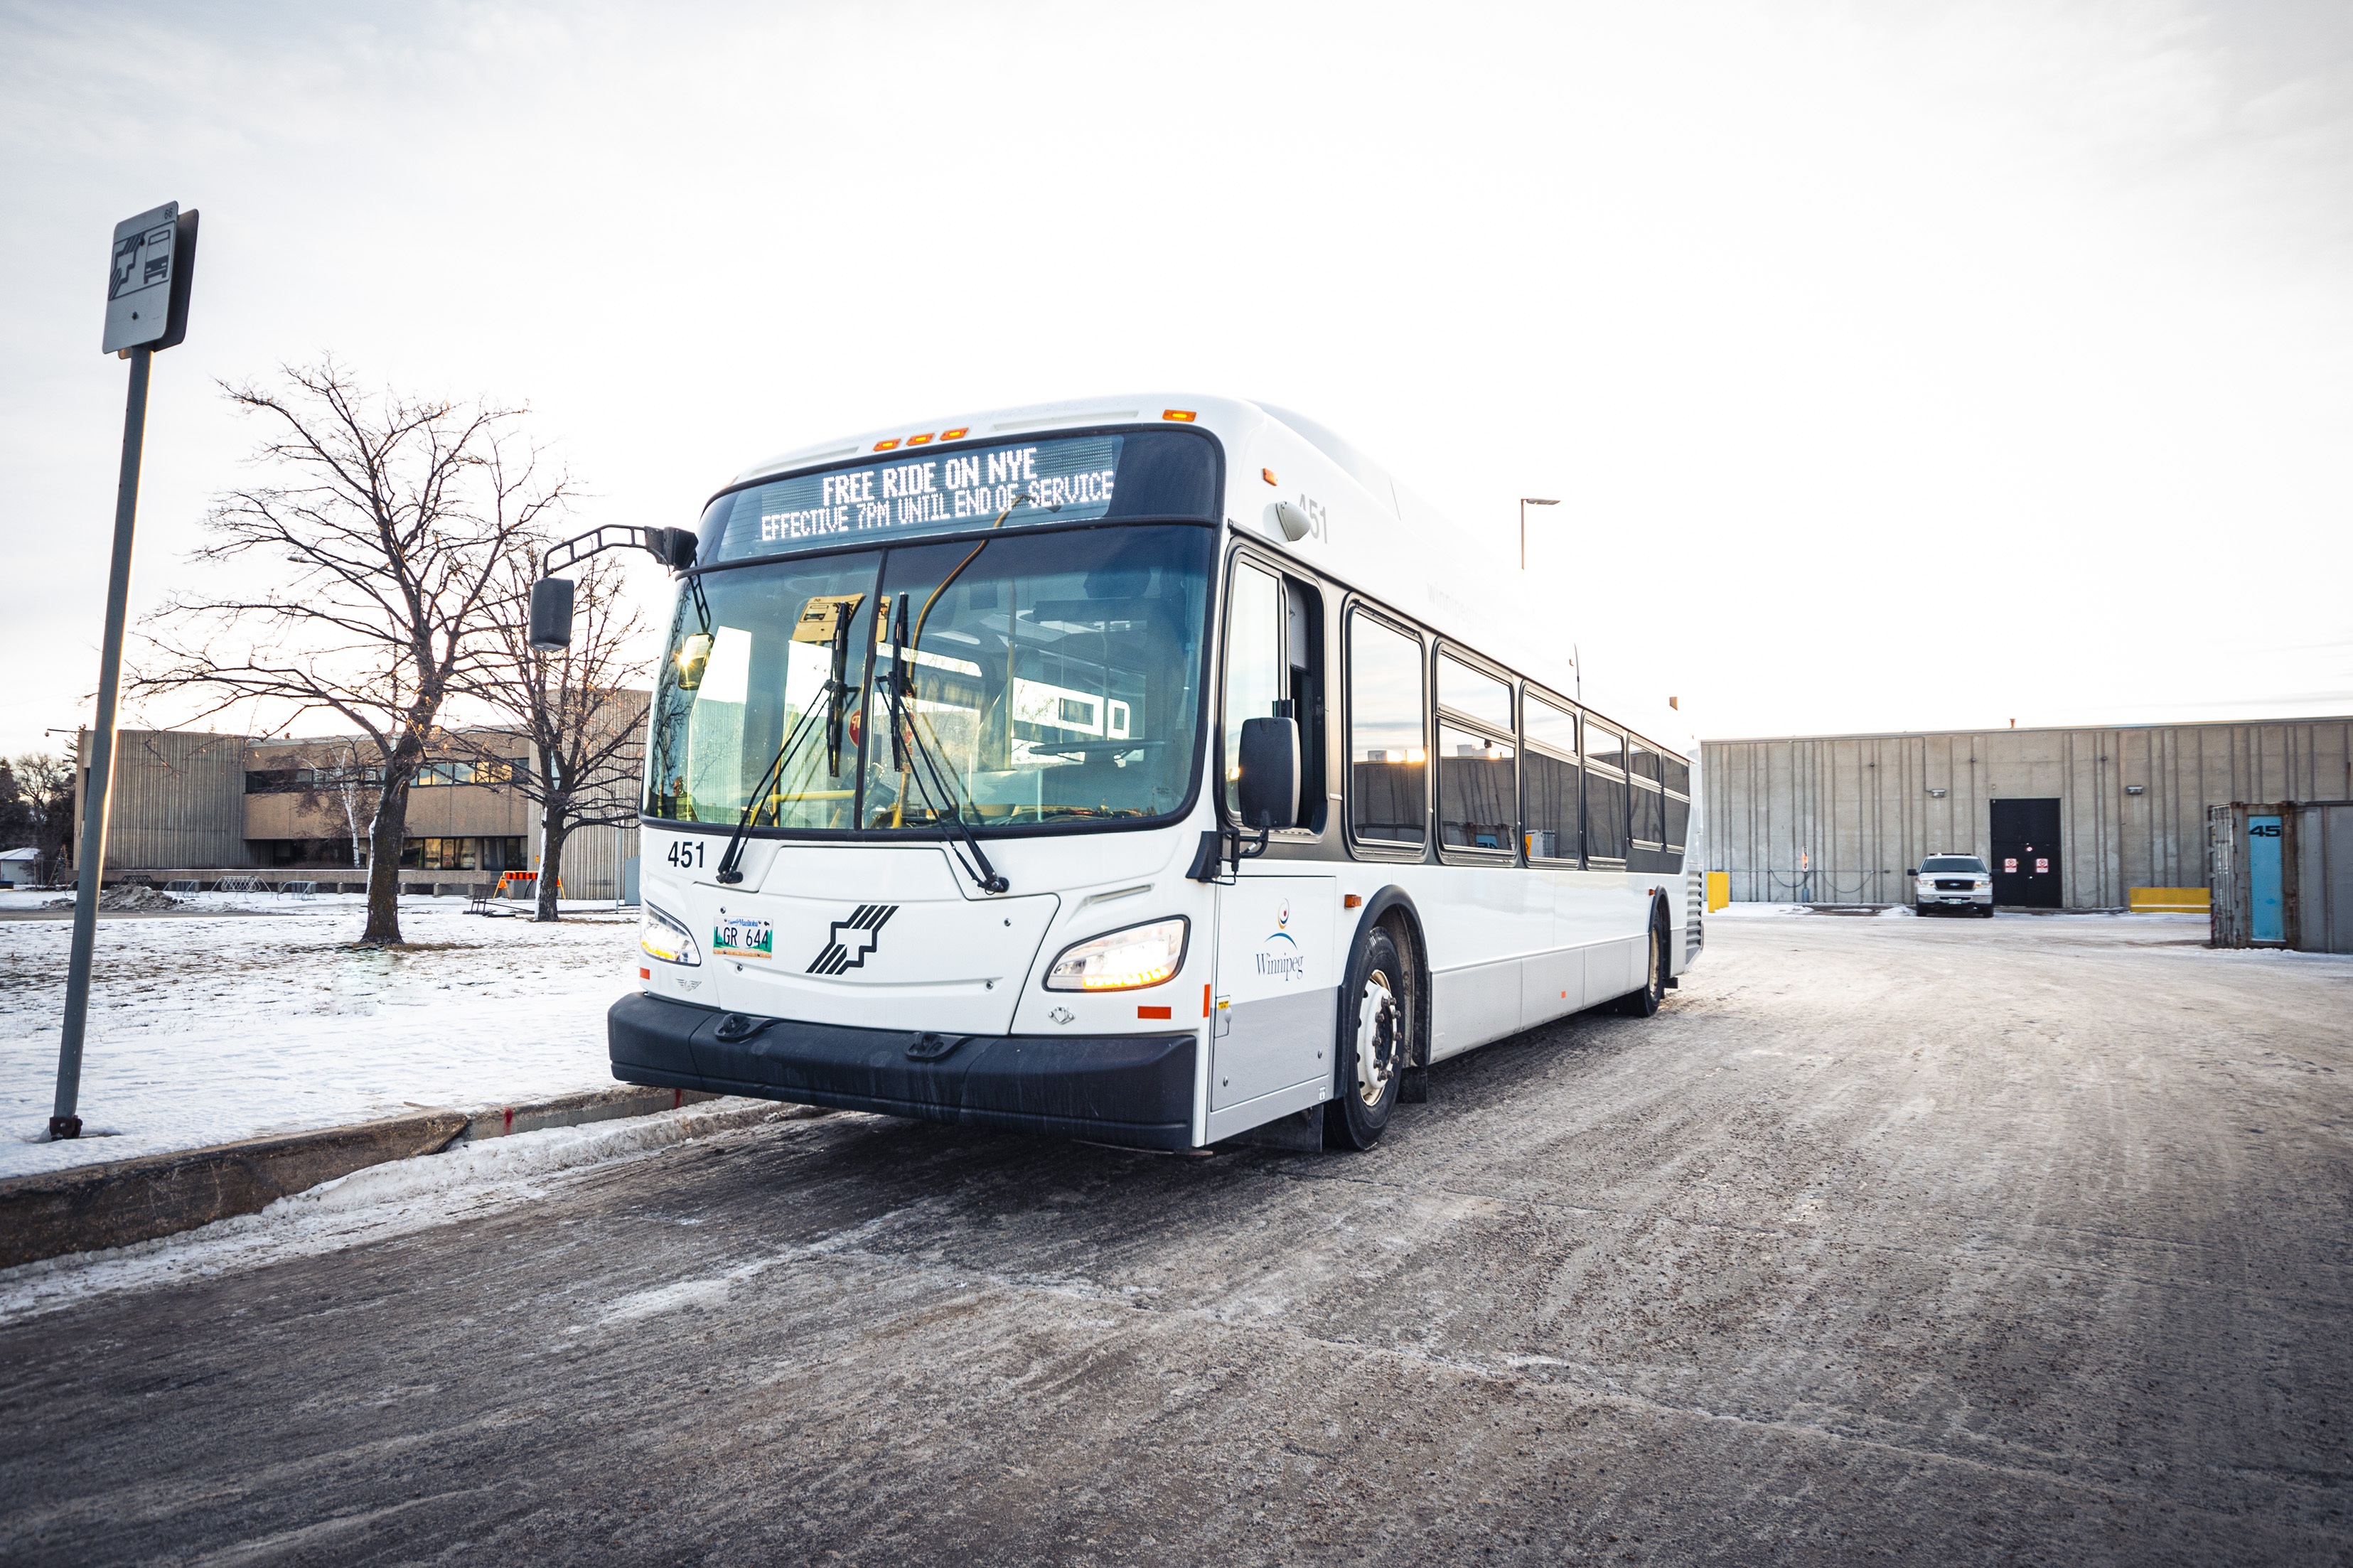 A Winnipeg Transit bus advertises free rides for New Year's Eve.